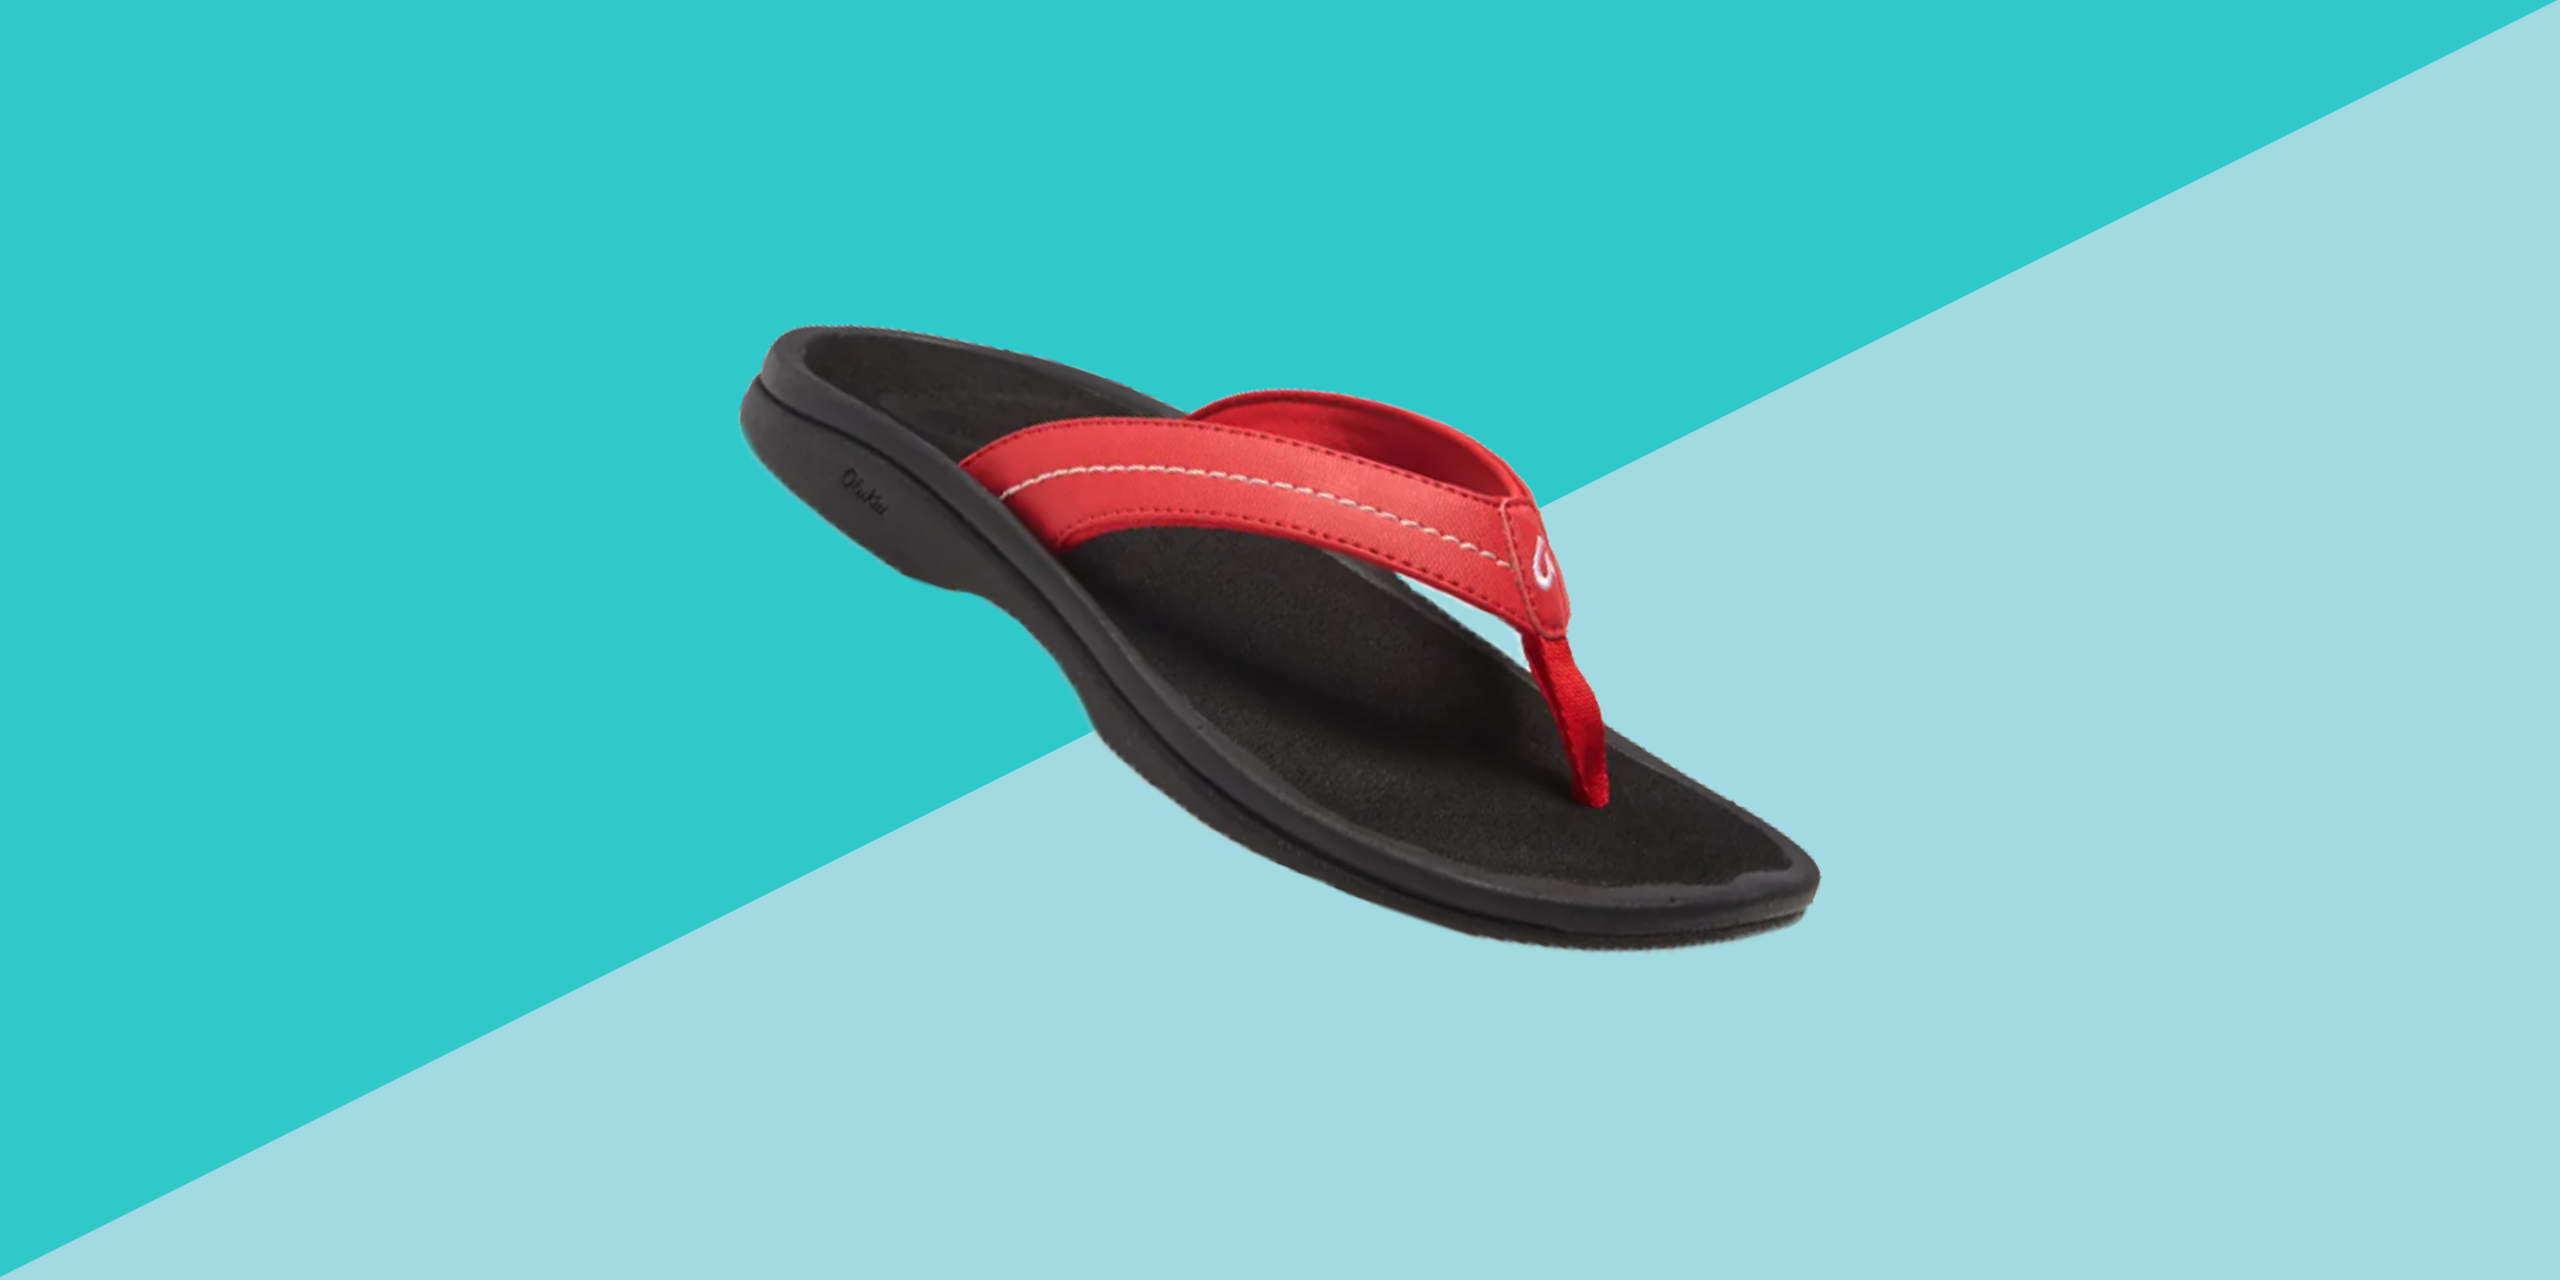 Original Orthotic Comfort Thong Style Flip Flops Sandals for Women with Arch Support for Comfortable Walk 